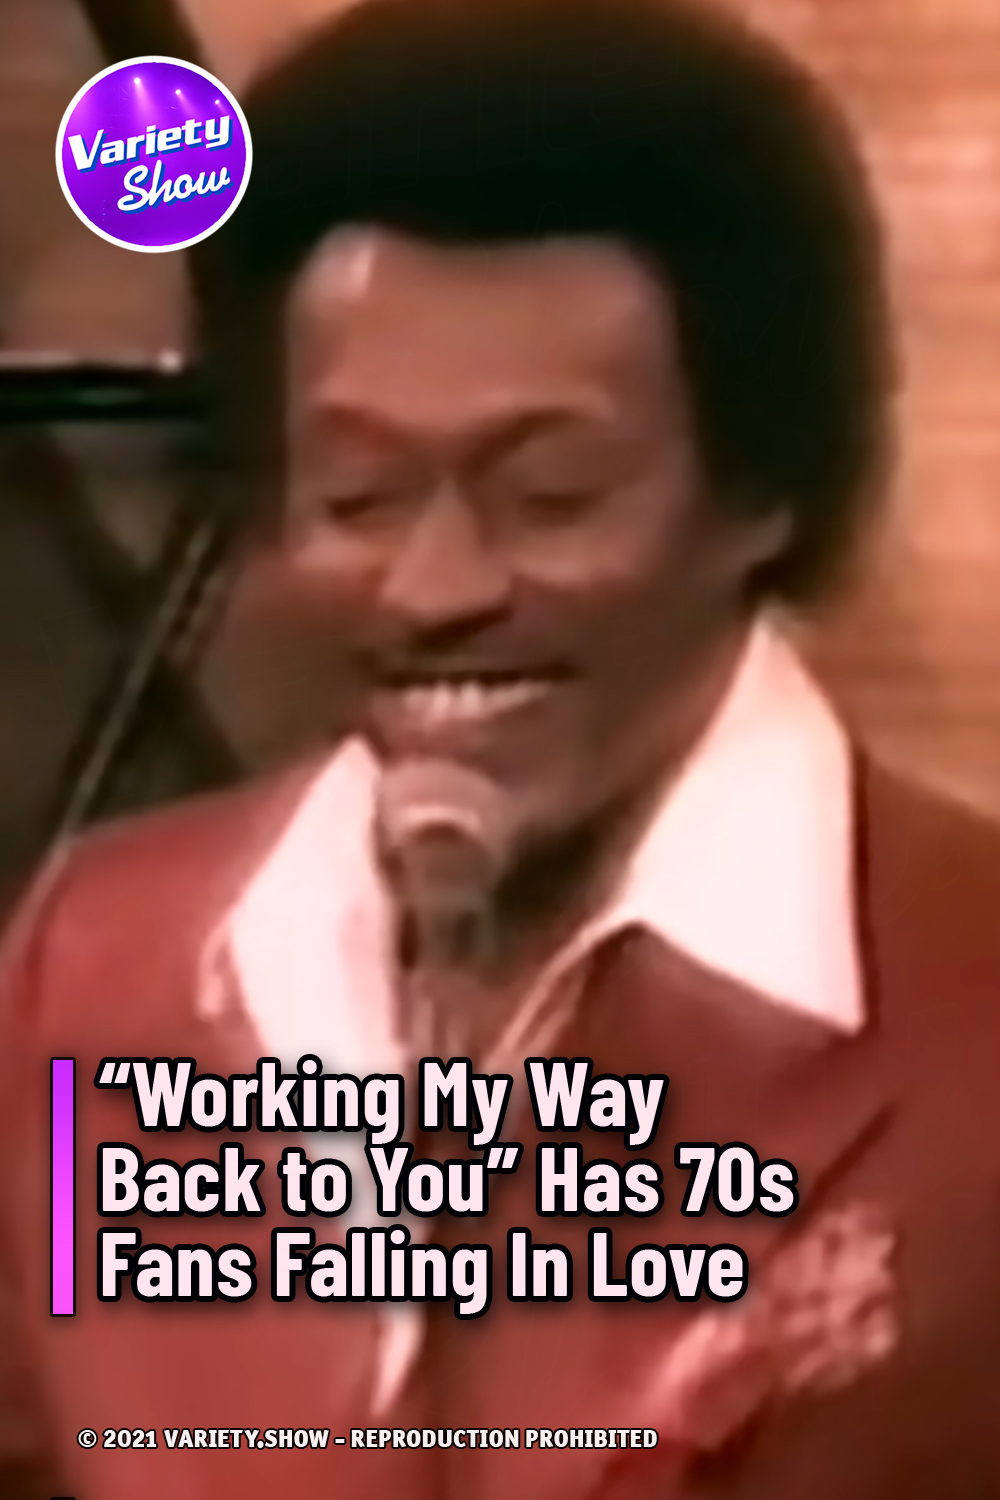 “Working My Way Back to You” Has 70s Fans Falling In Love